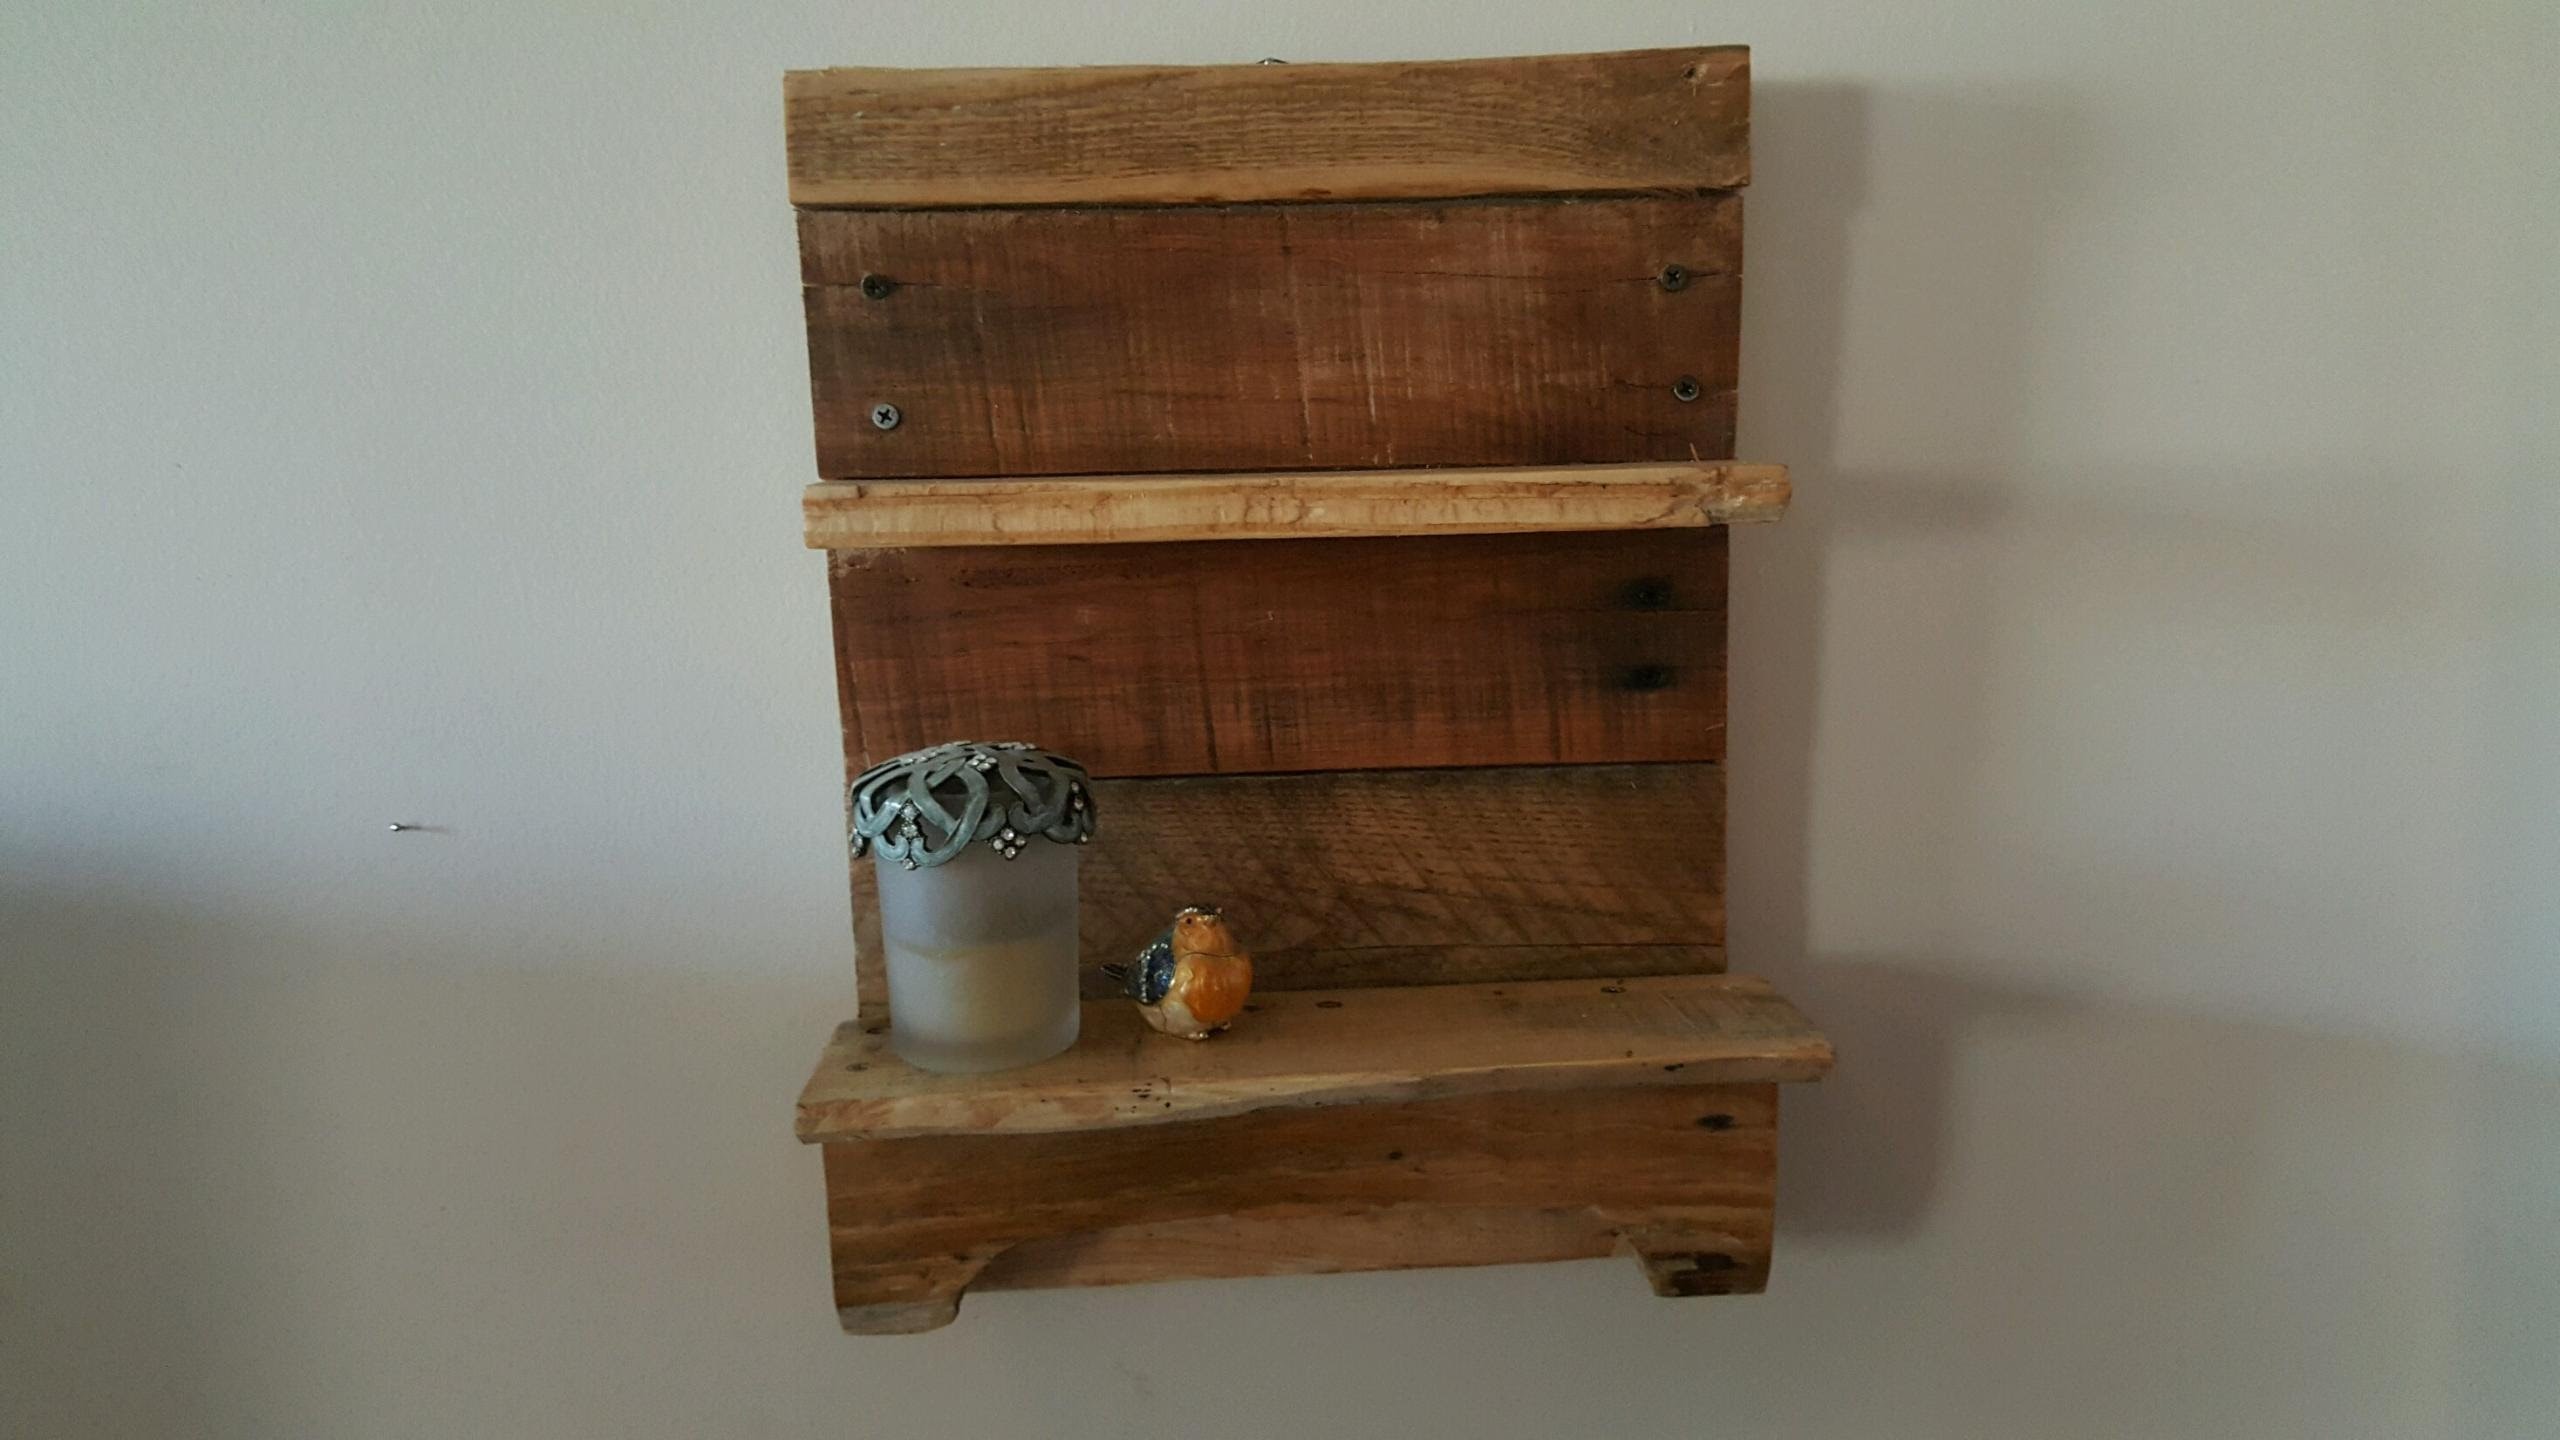 2560x1440 Handcrafted, rectangular, double shelf made from re-purposed shipping  pallets. Horizontal pattern, sanded and stained with a light stain.